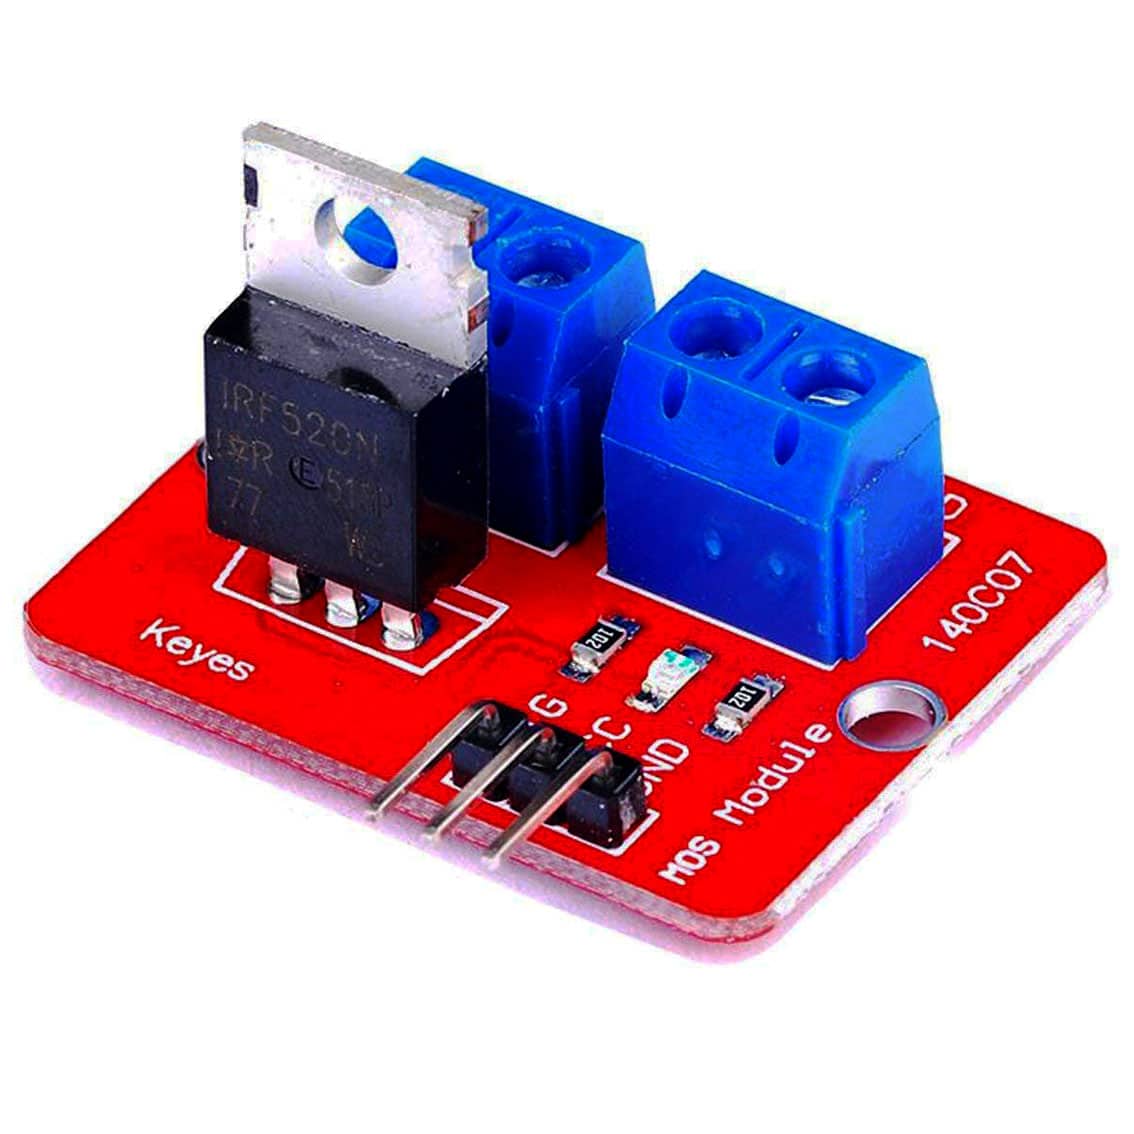 Mosfet Driver Module Irf520 Phipps Electronics